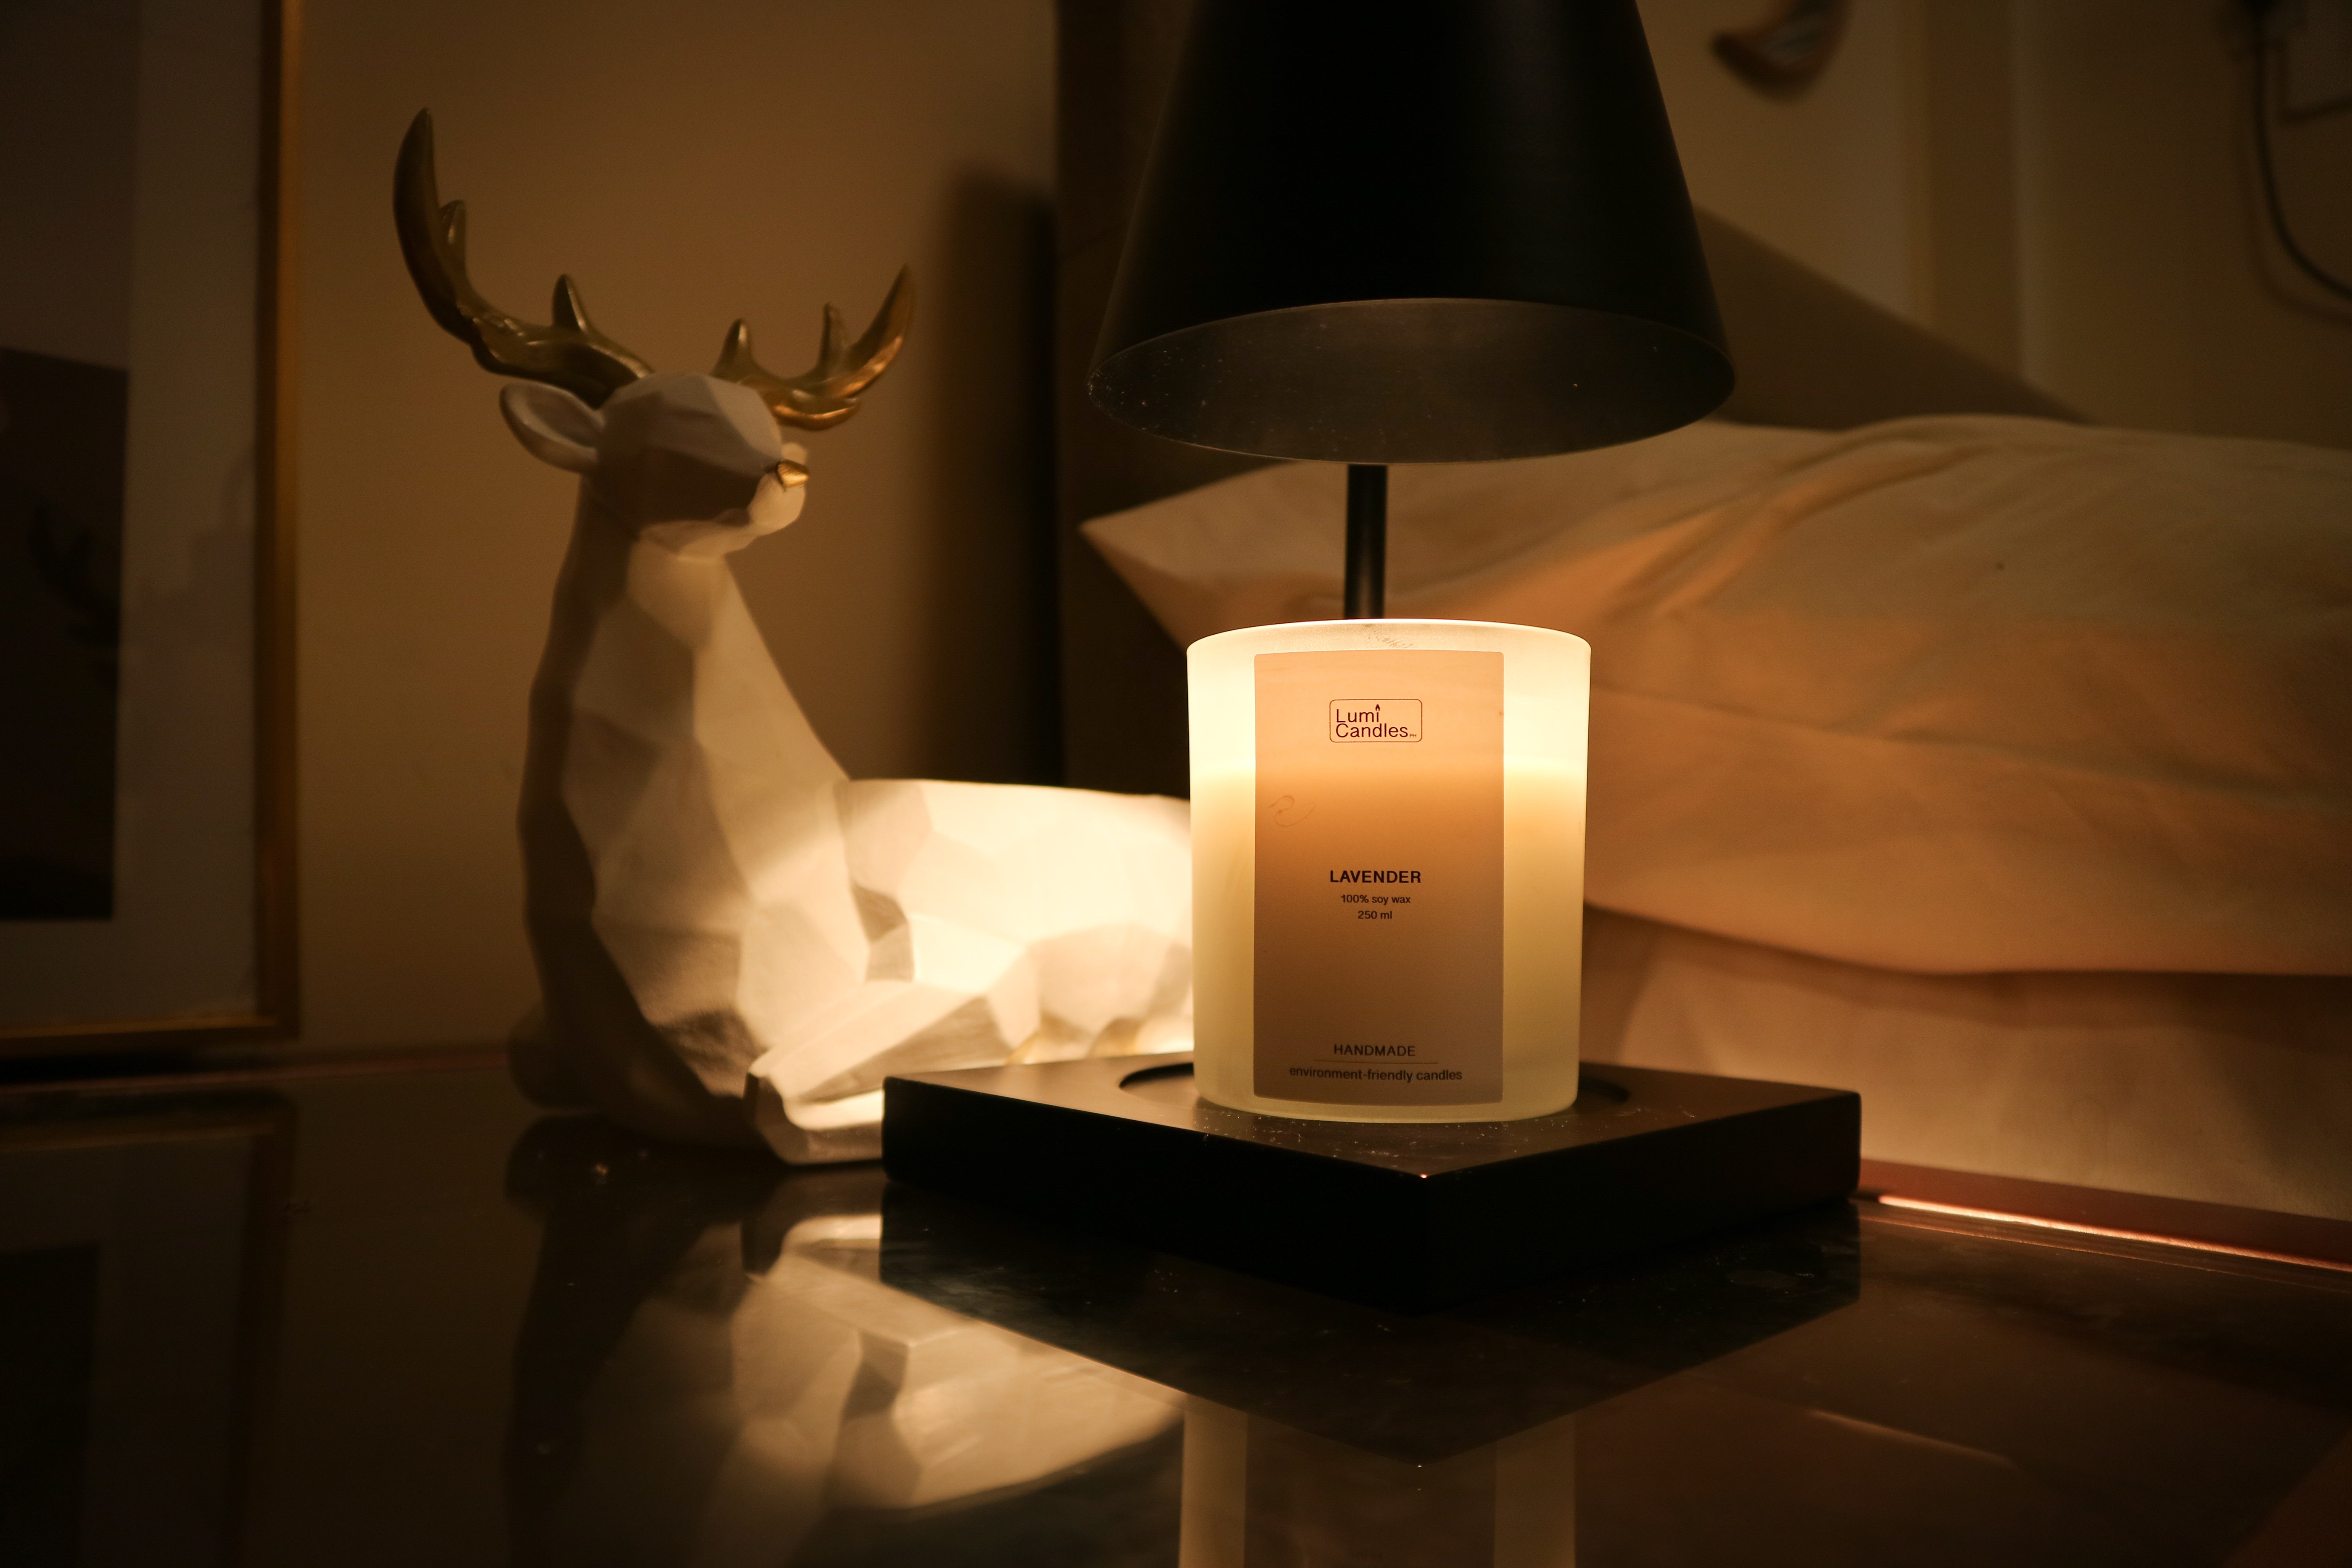 A Lavender Scent Lumi Candle under a Candle Warmer